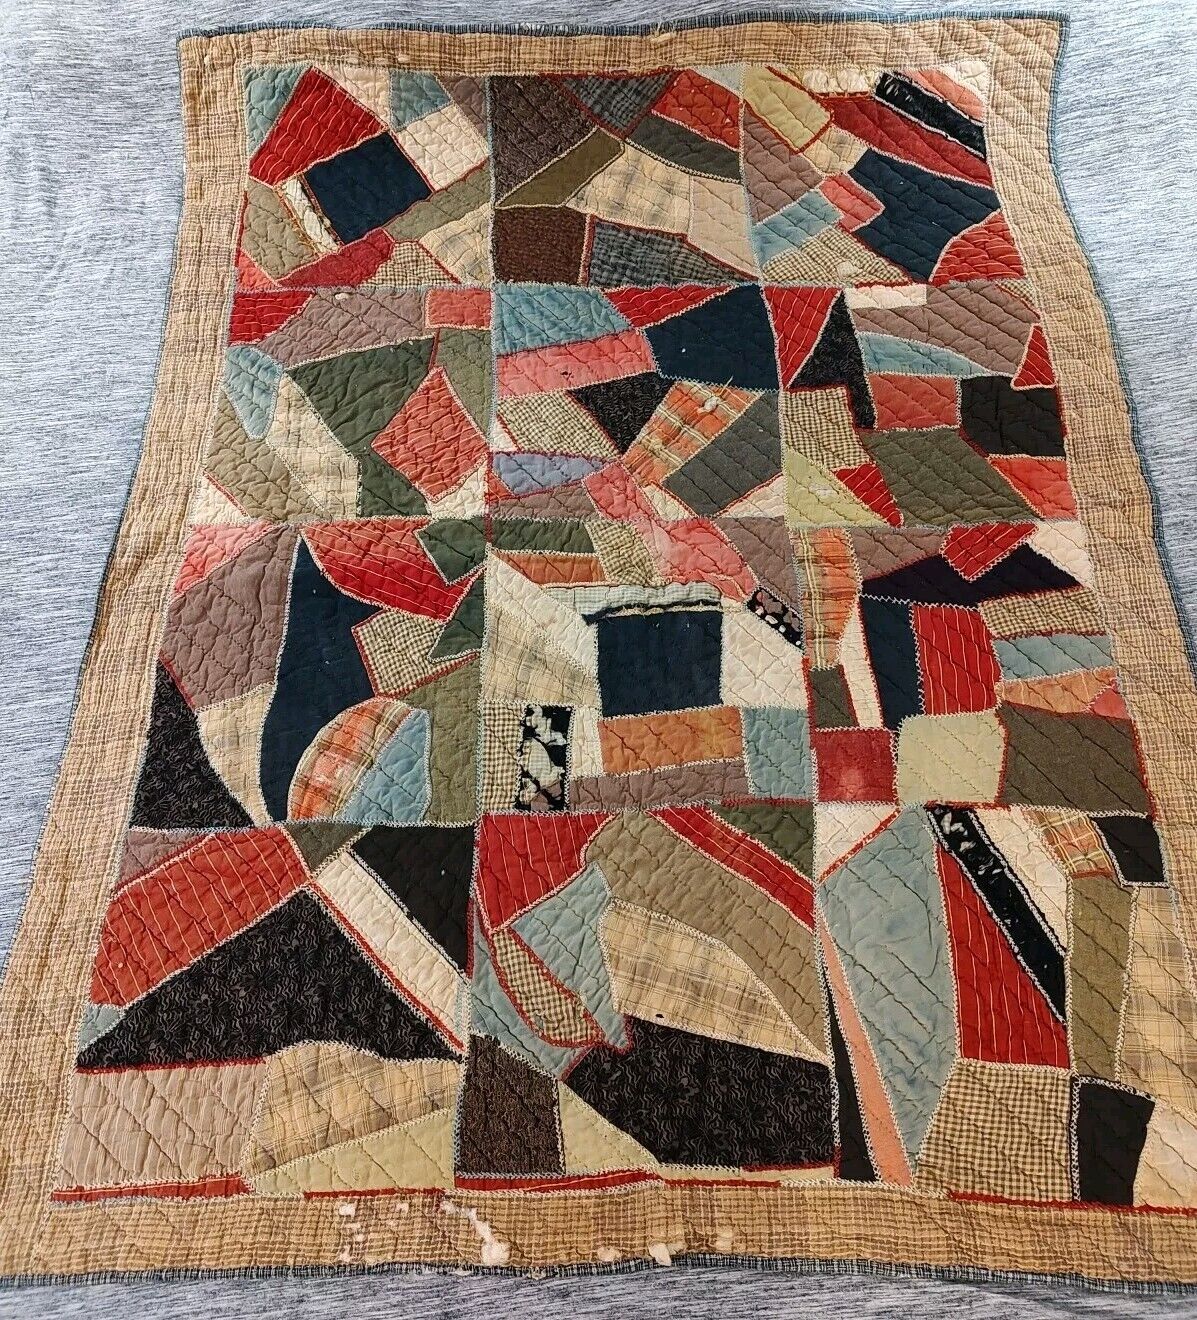 Antique 1800s Hand Stitched Patchwork Quilt-in-a-quilt Wool Cotton 65X51